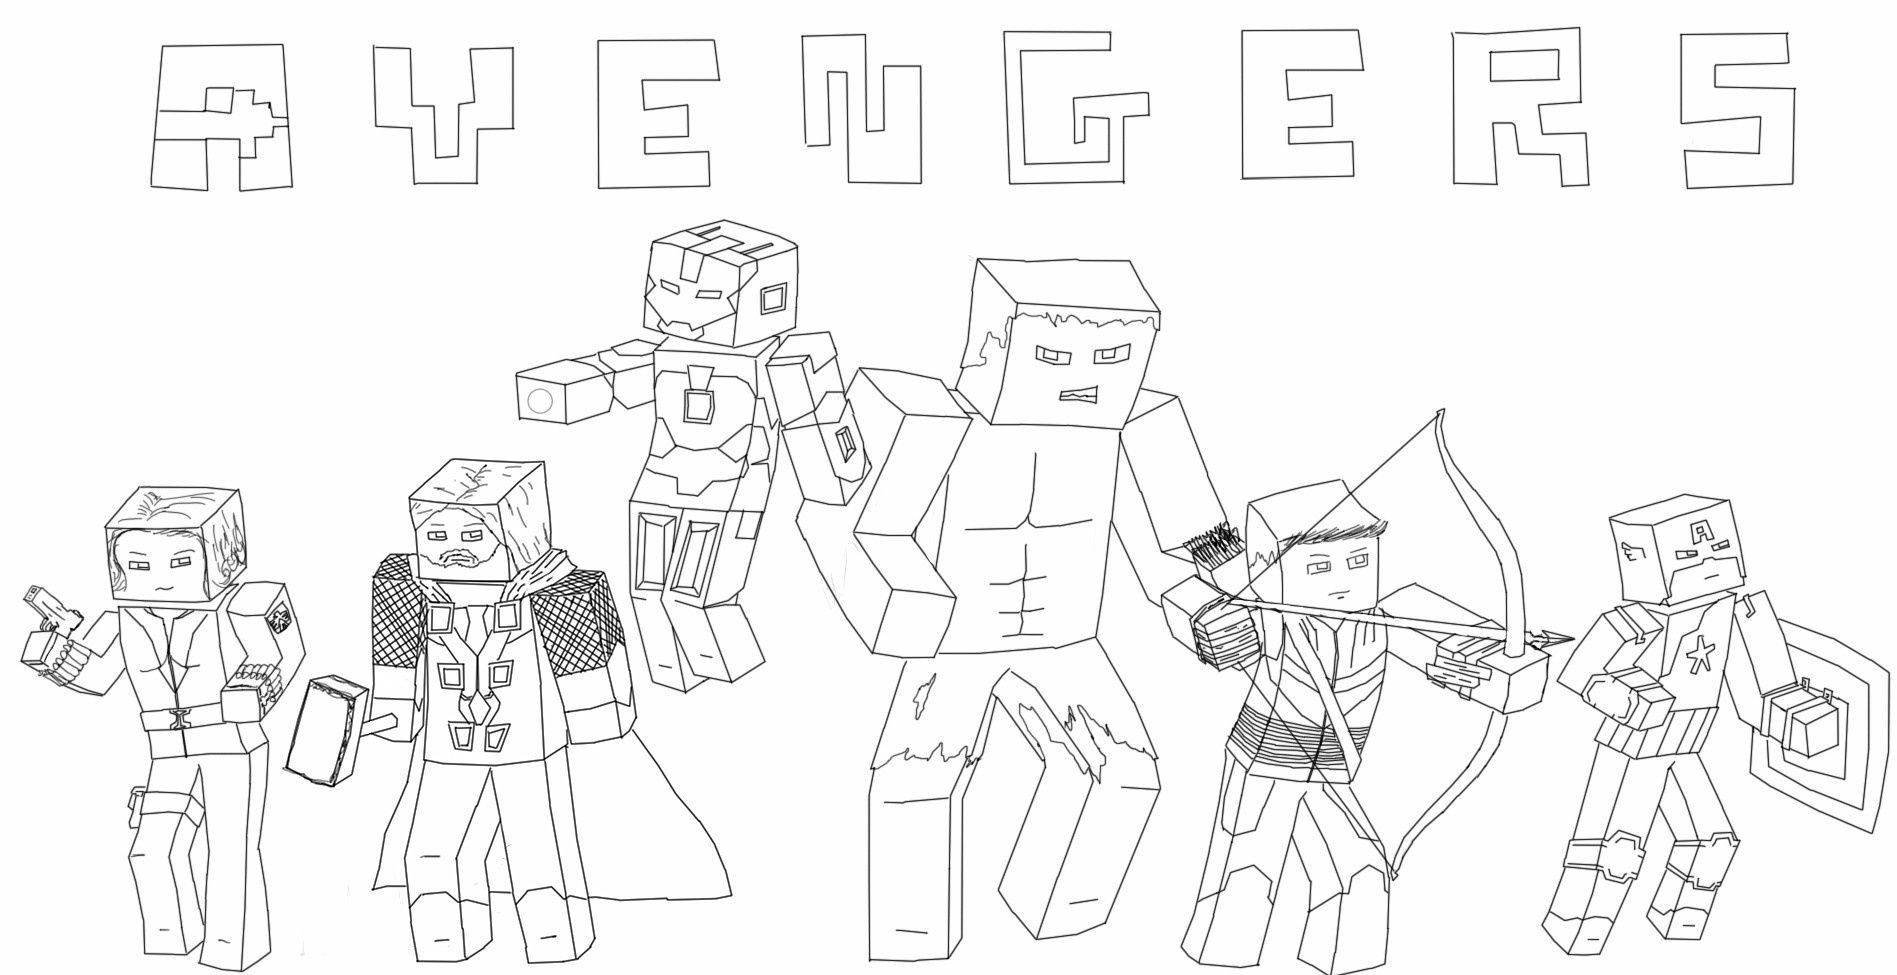 Minecraft Coloring Pages For Girls
 Pin by Danielle Davis Foster on Coloring pages